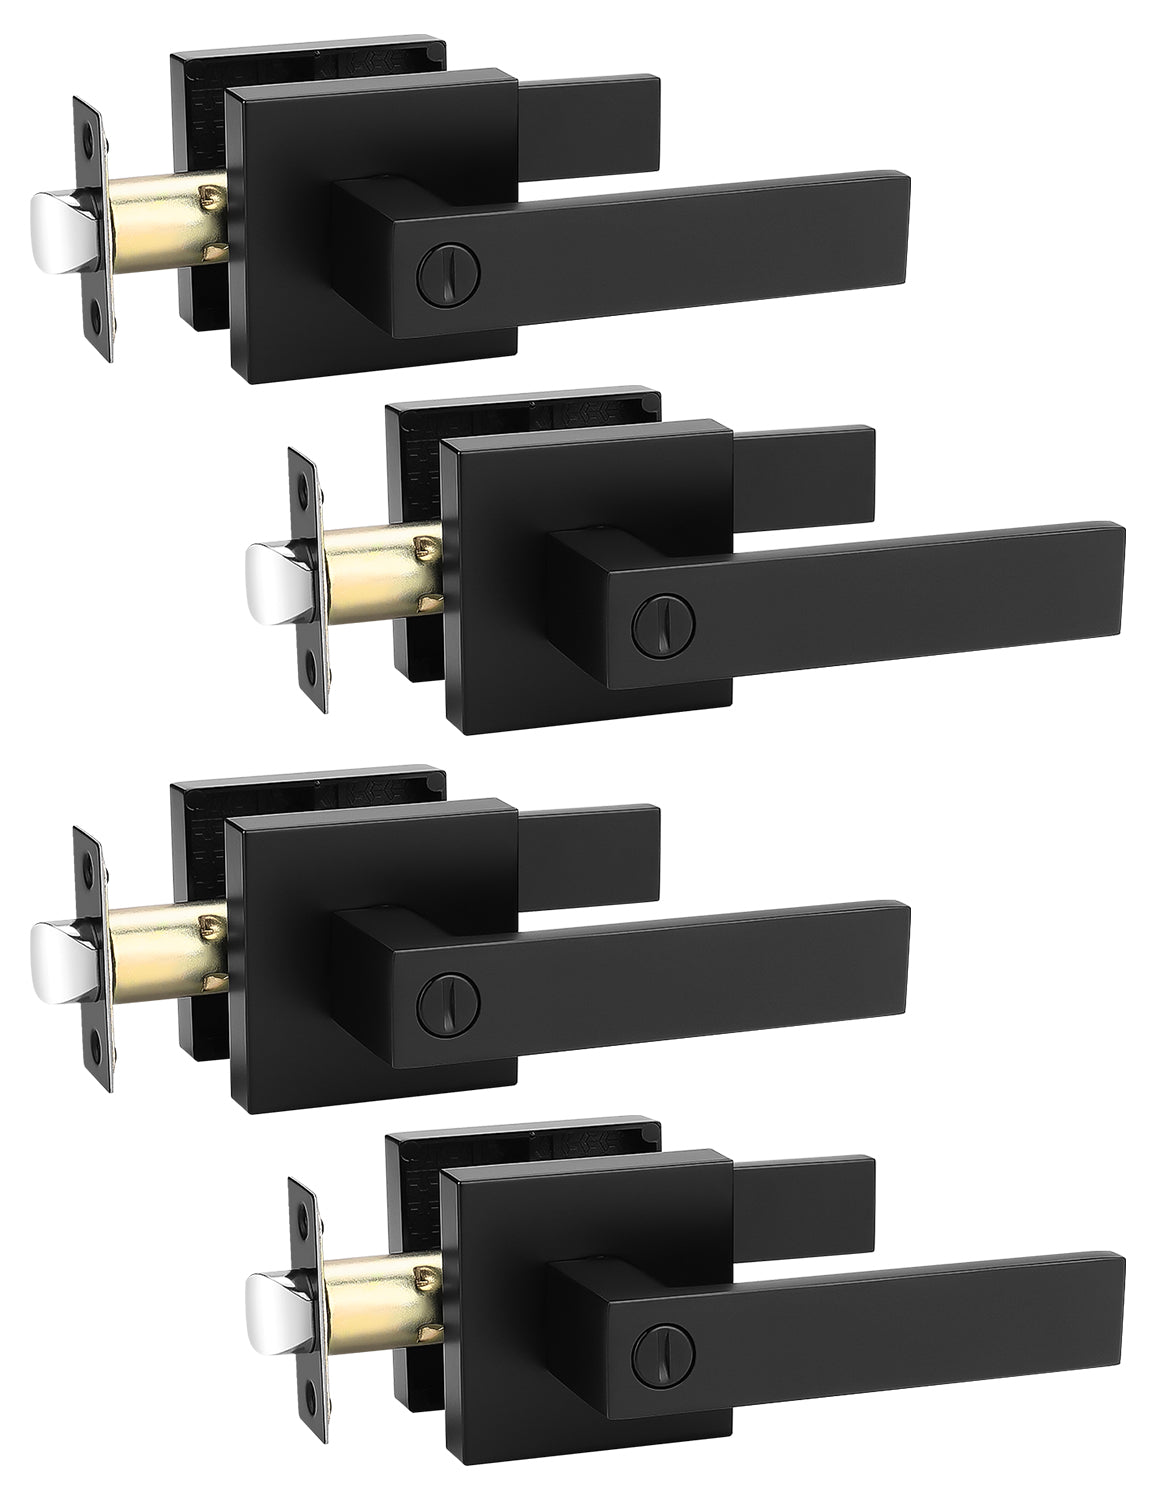 Tinewa 4 Pack Square Privacy Door Levers Locksets in Matte Black Finish, Bed/Bath Door Levers Keyless Interior Handles,Reversible for Left Right Handed Doors